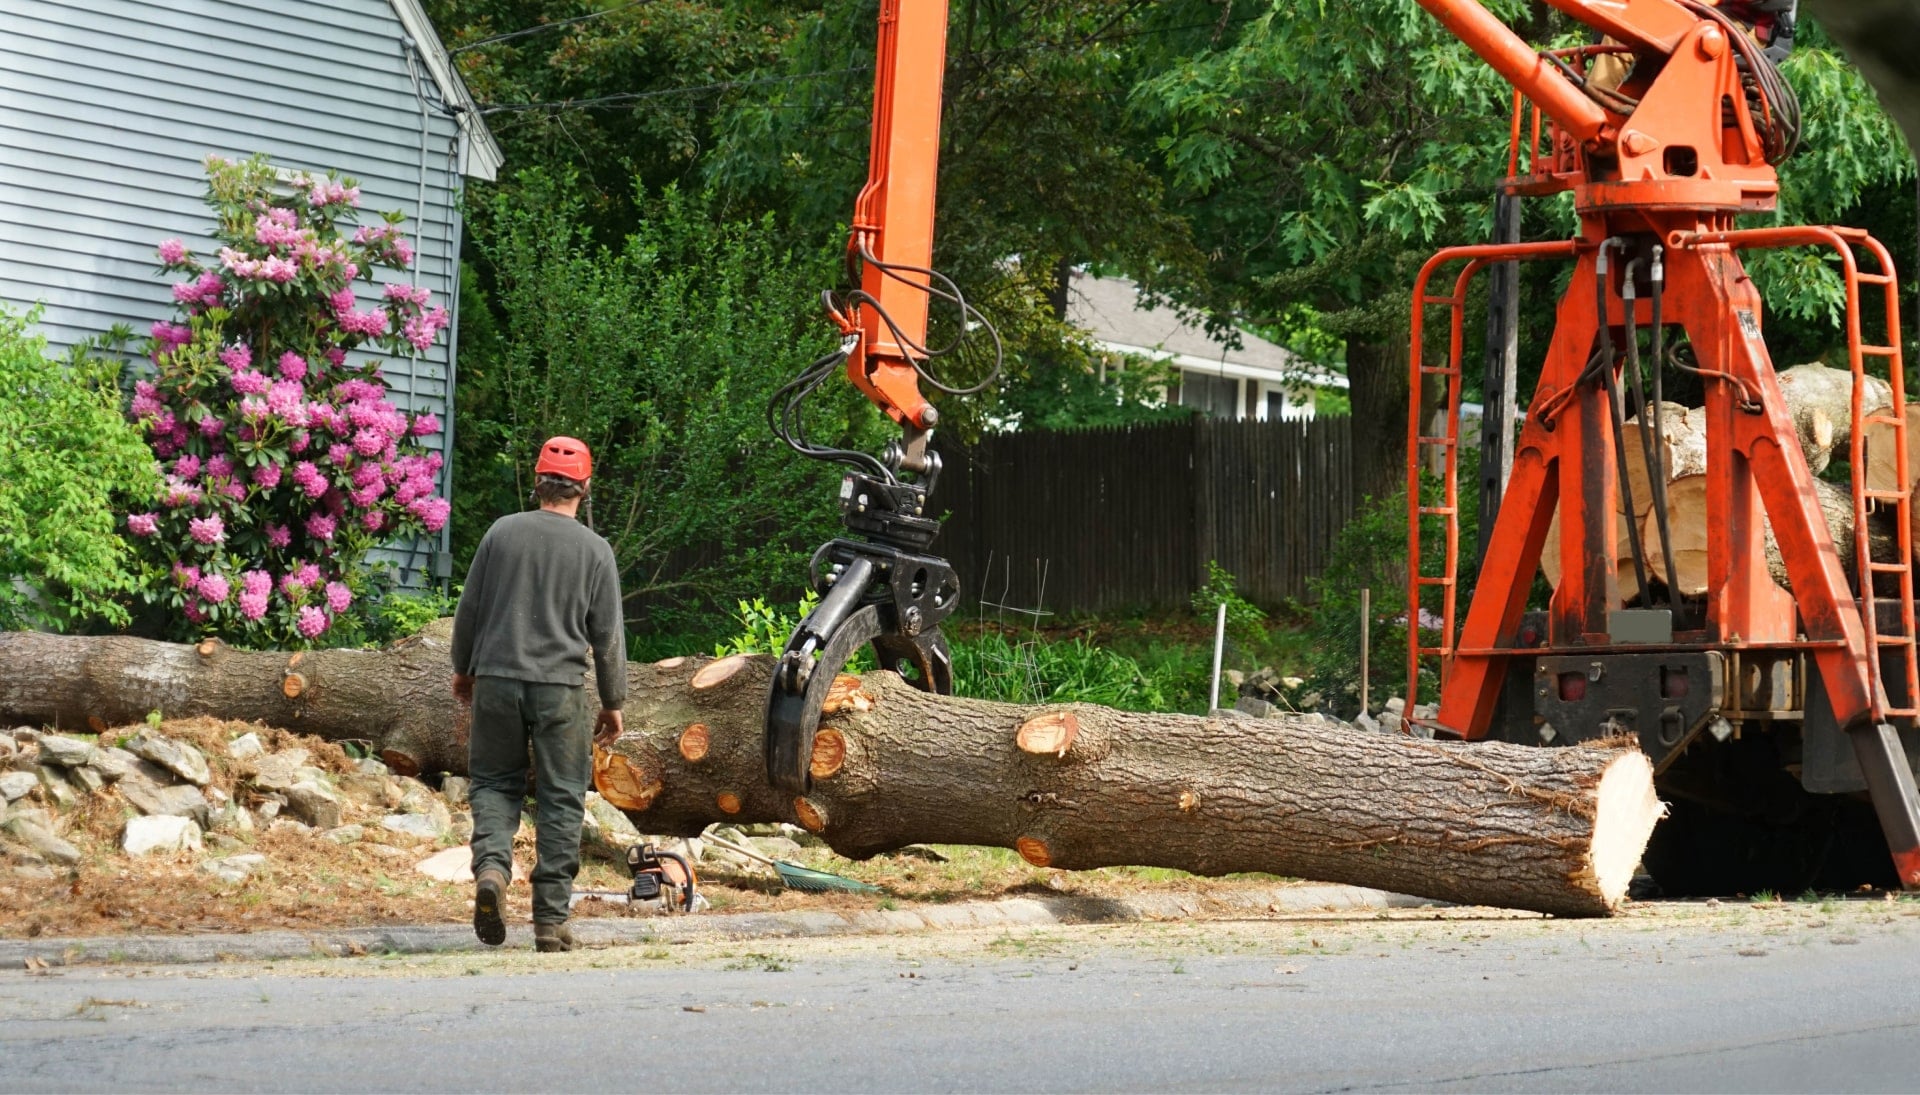 Heavy machinery is used to remove a tree after cutting in a Chandler, AZ yard.